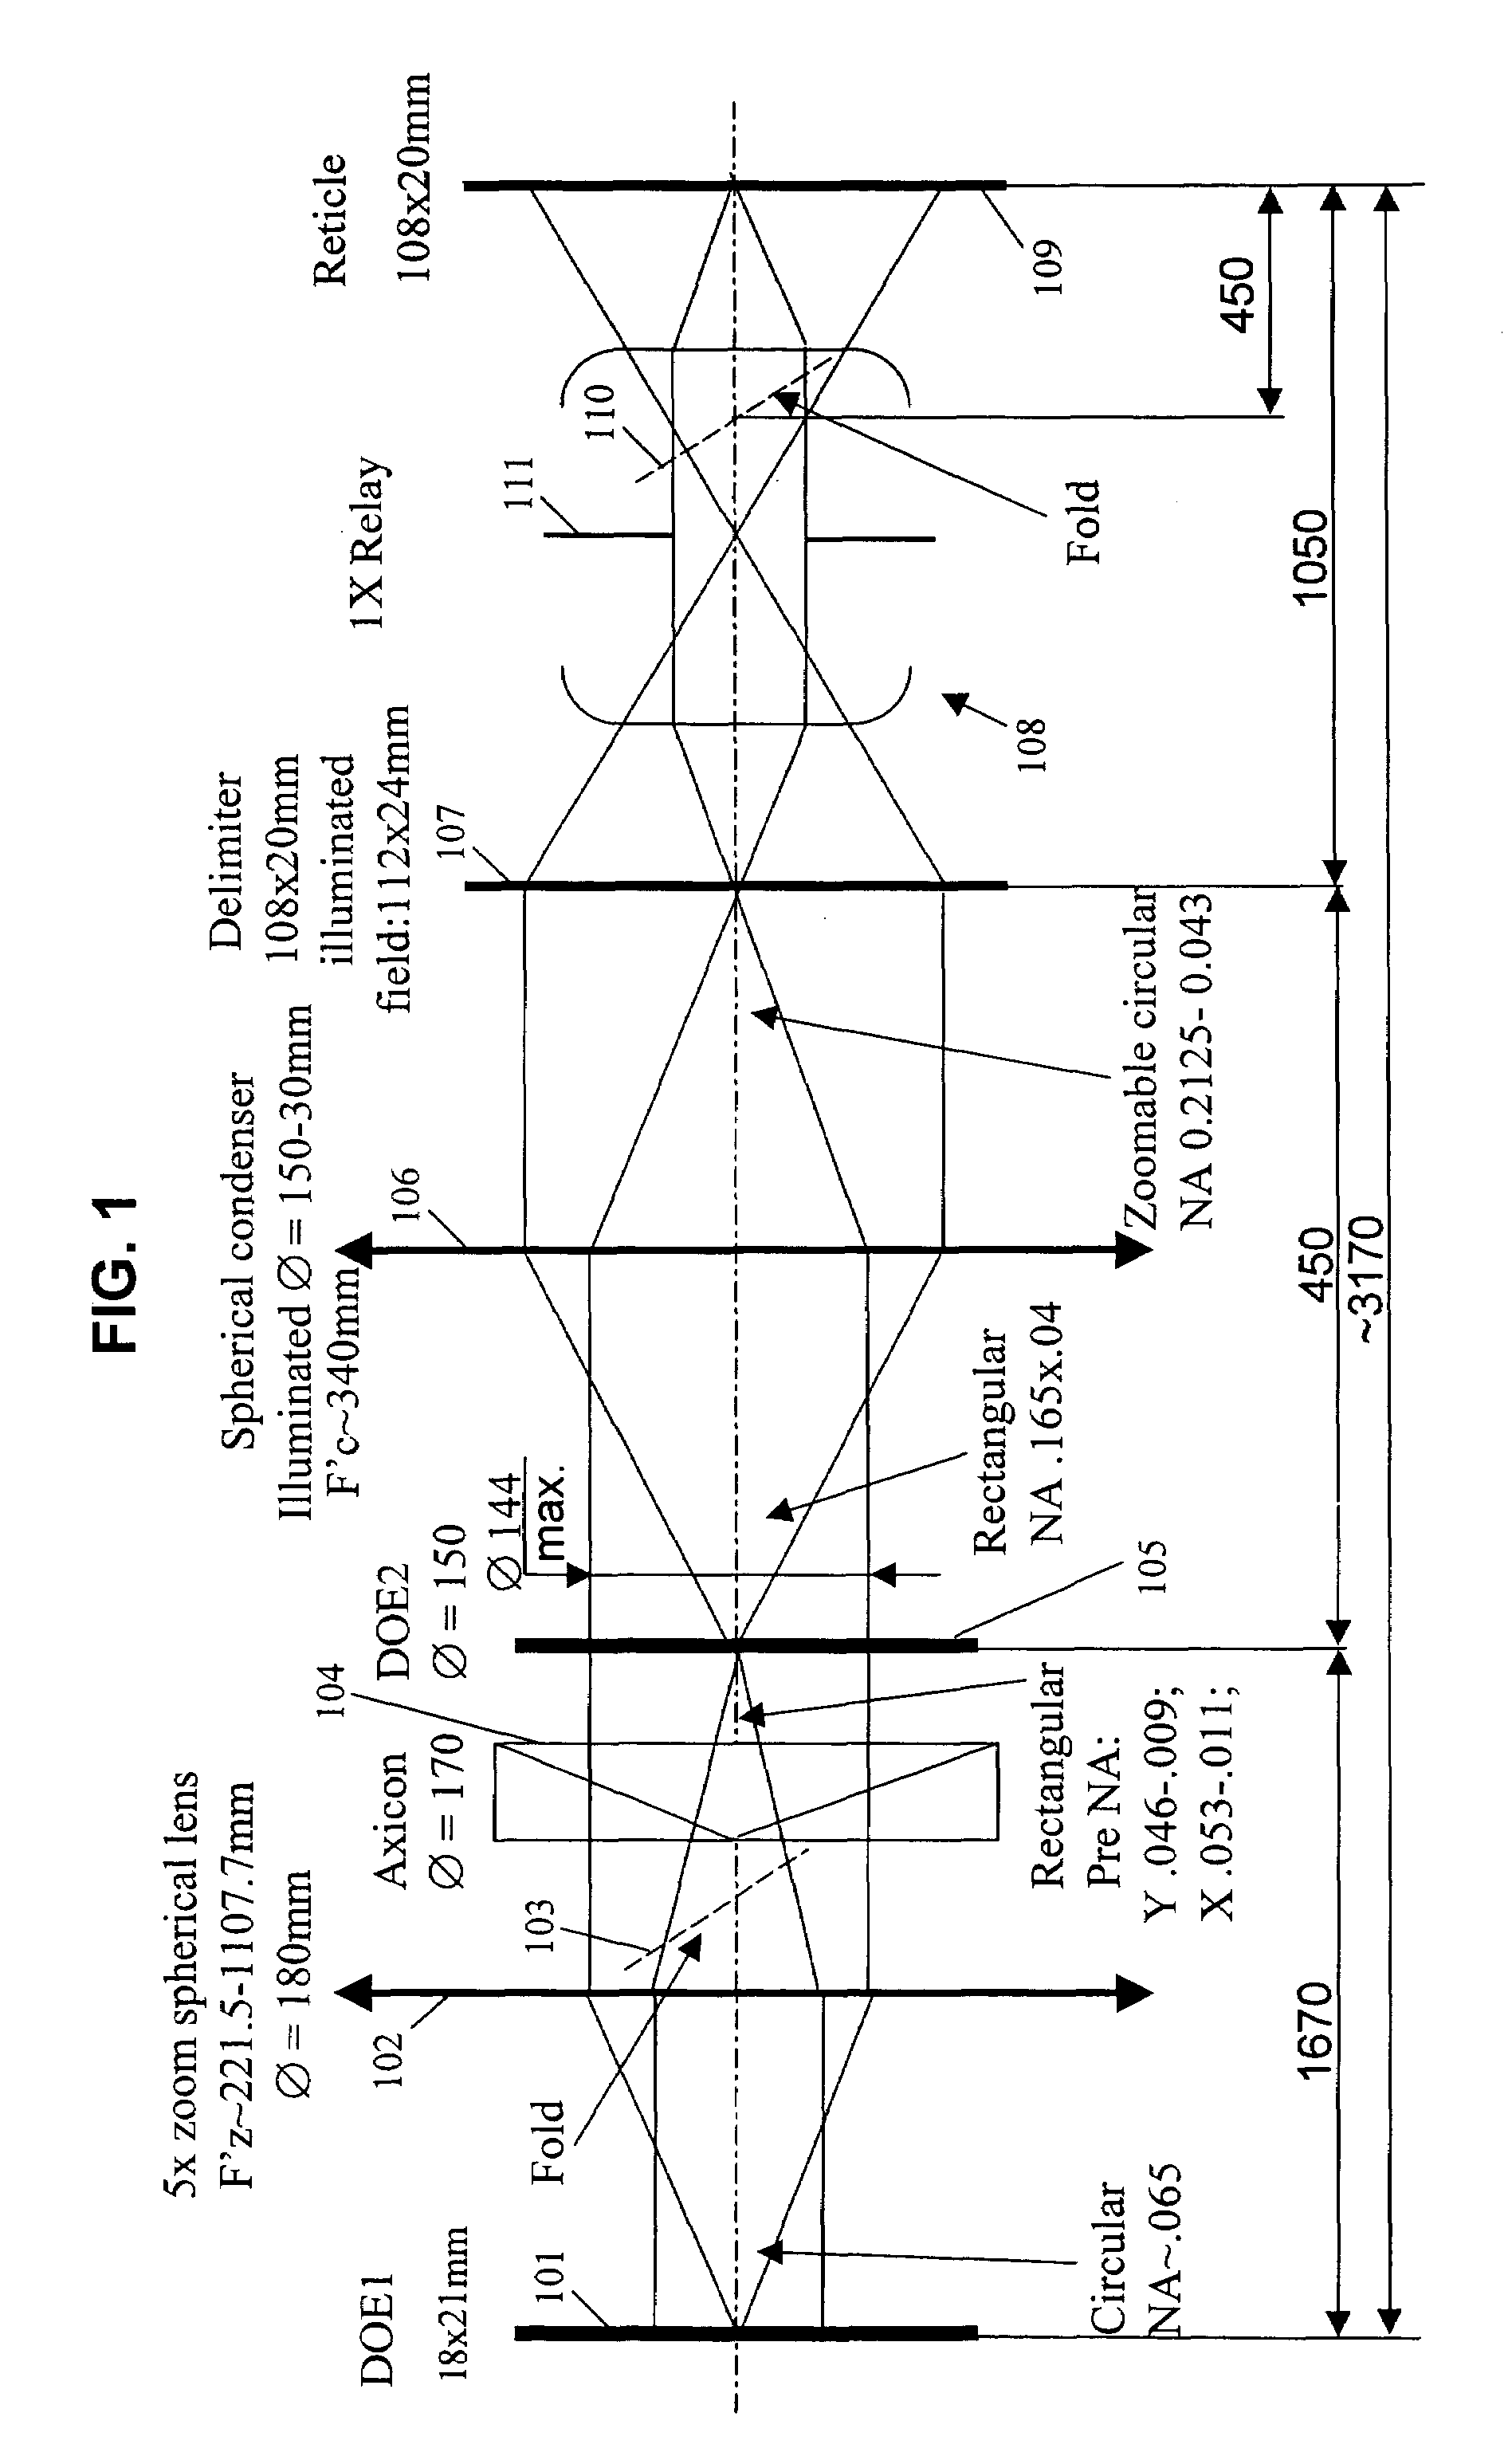 Advanced illumination system for use in microlithography